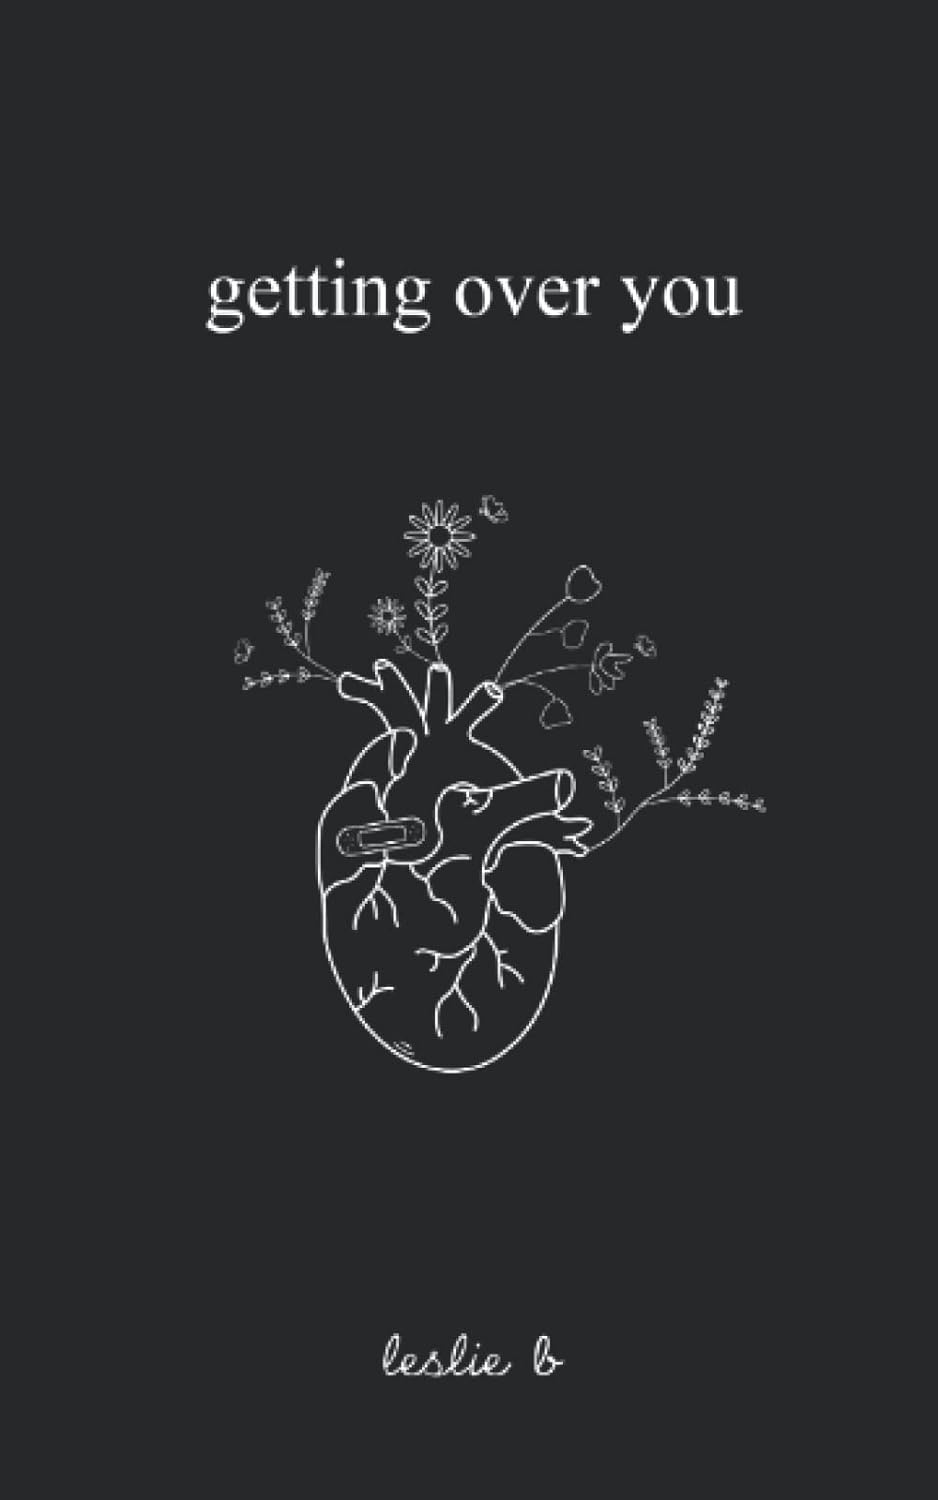 getting over you by leslie b